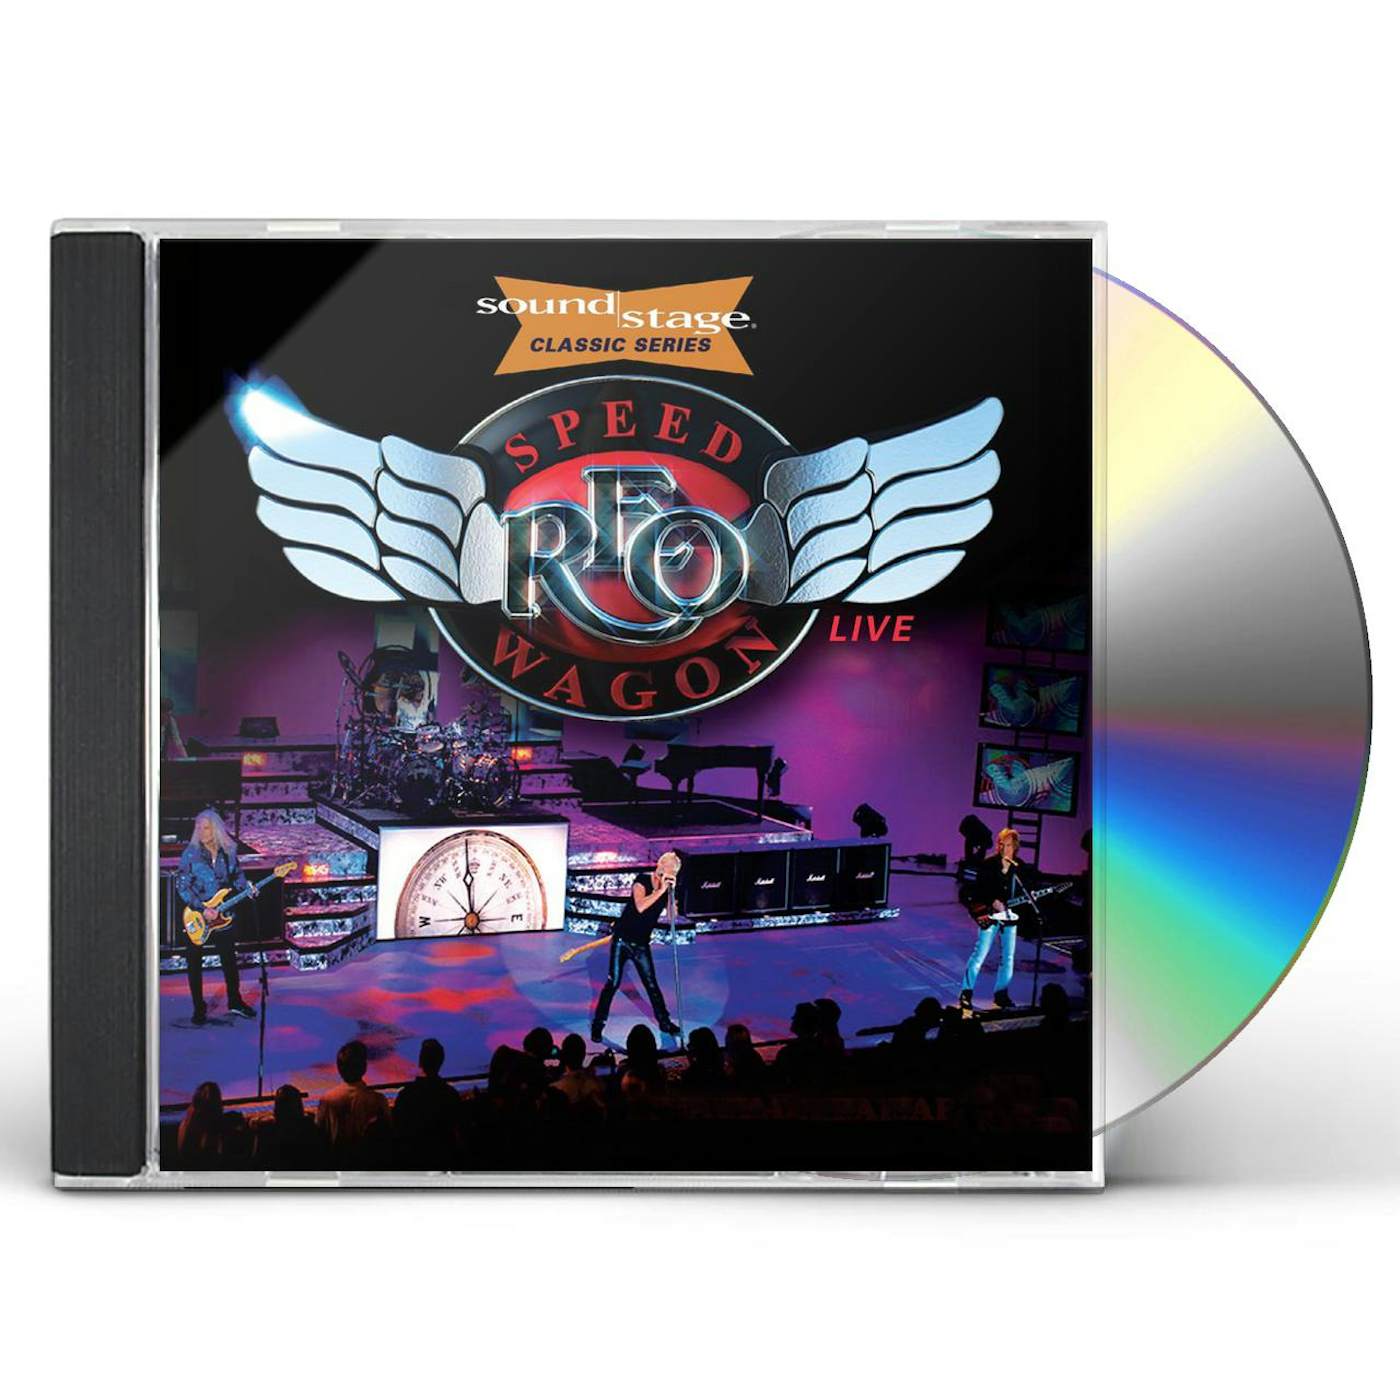 REO Speedwagon LIVE ON SOUNDSTAGE (CLASSIC SERIES) CD